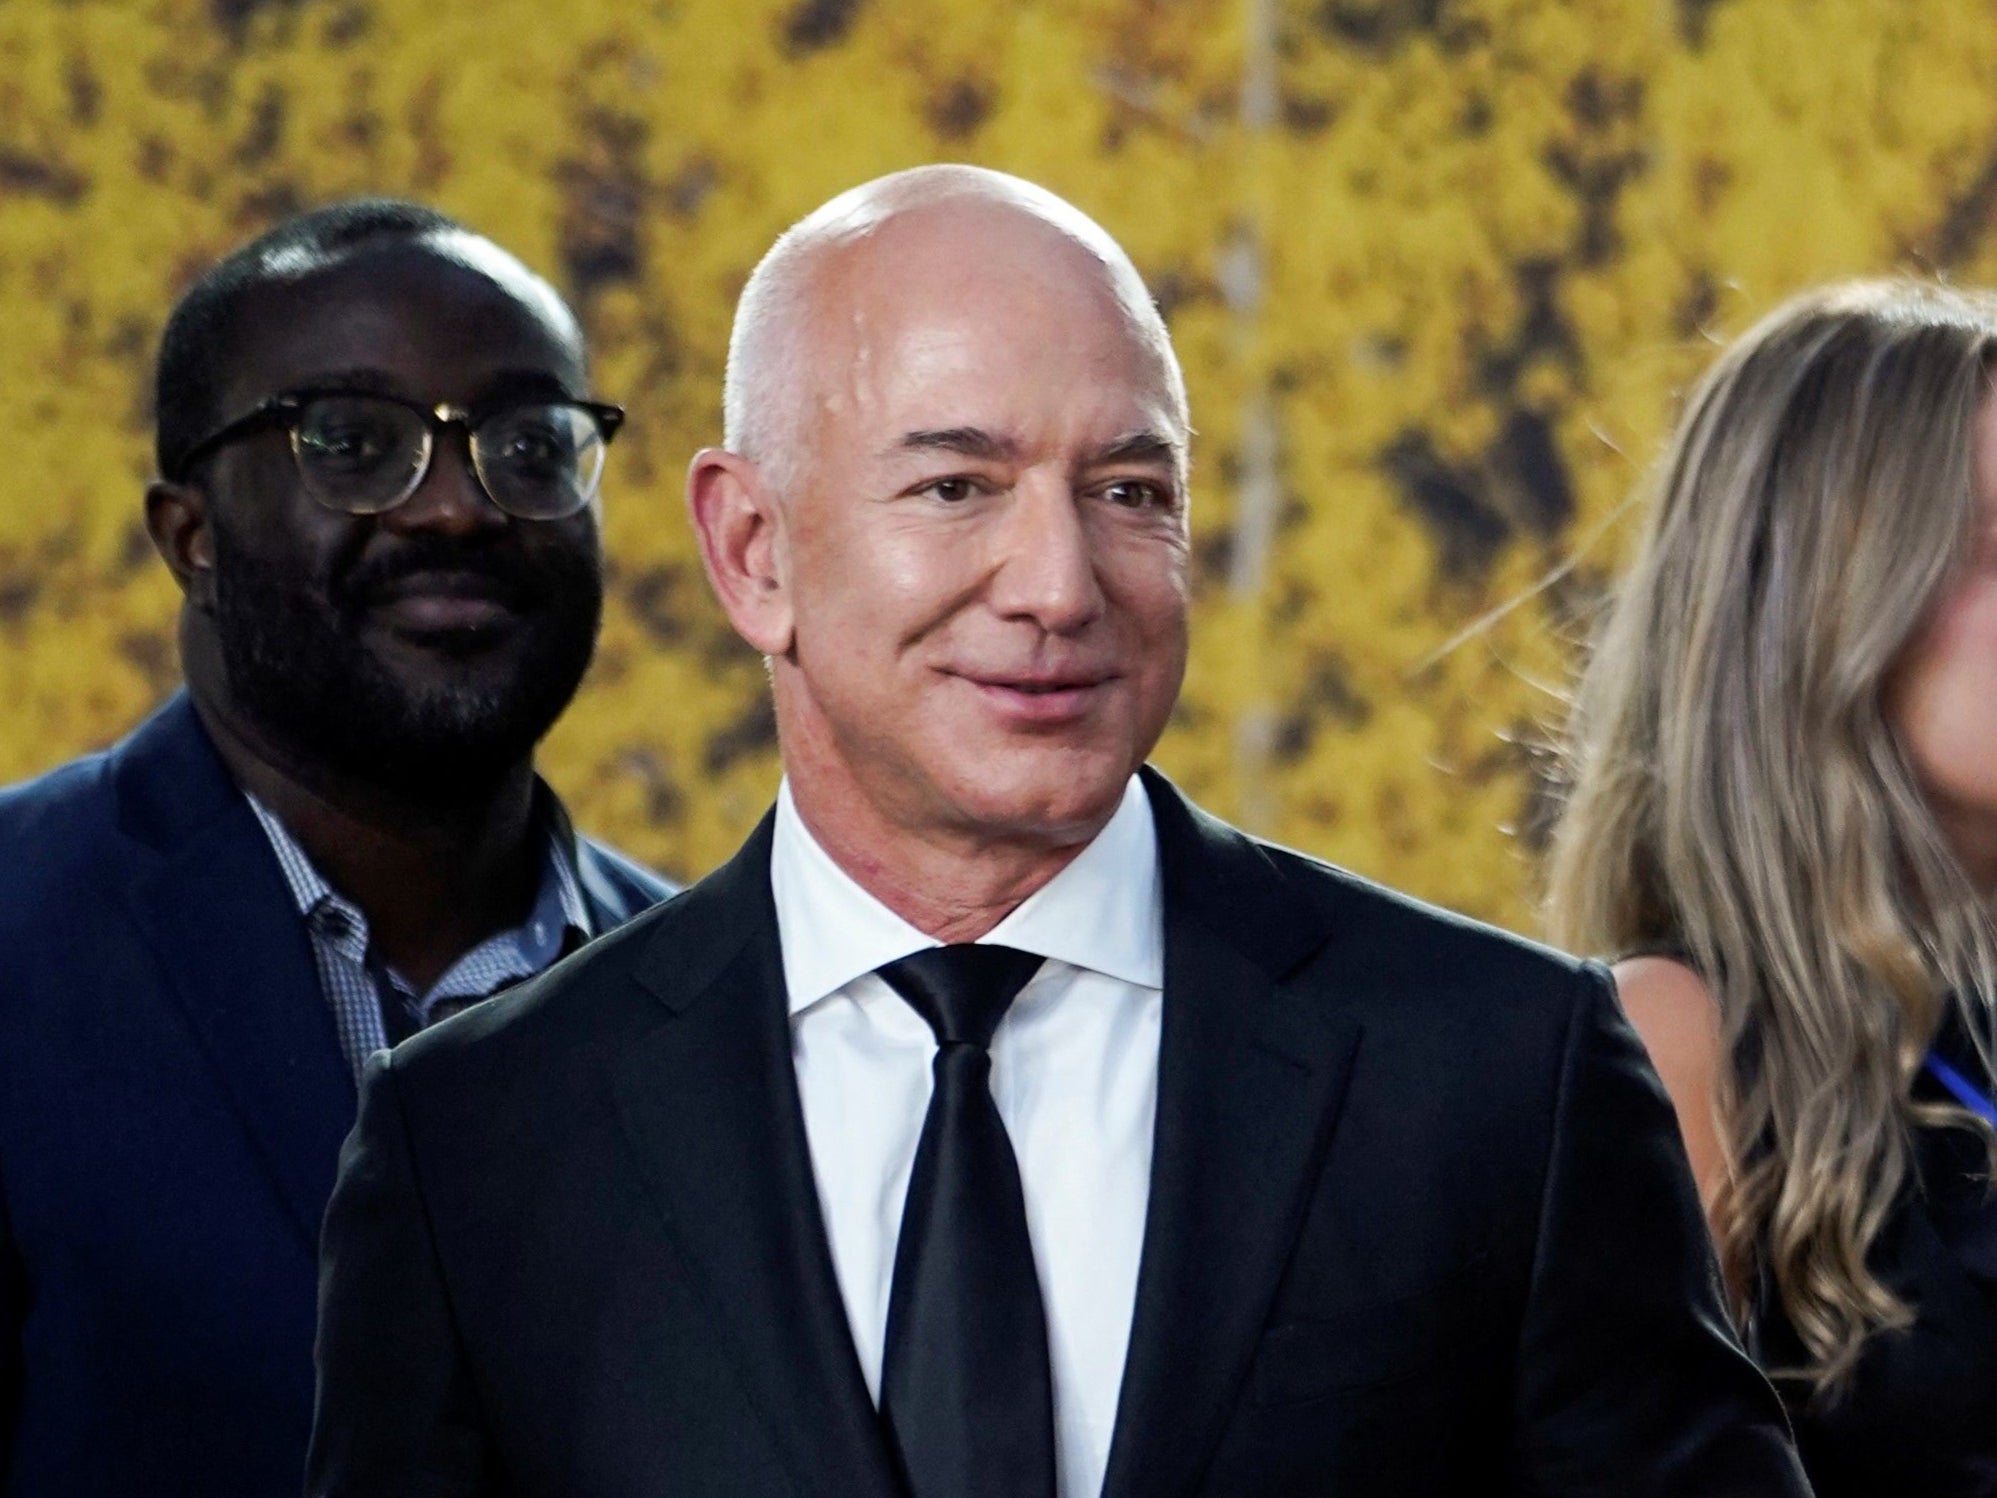 MacKenzie Scott’s net worth is currently about $37 billion, according to Forbes, about $2 billion more than she had after her divorce from Amazon founder Jeff Bezos